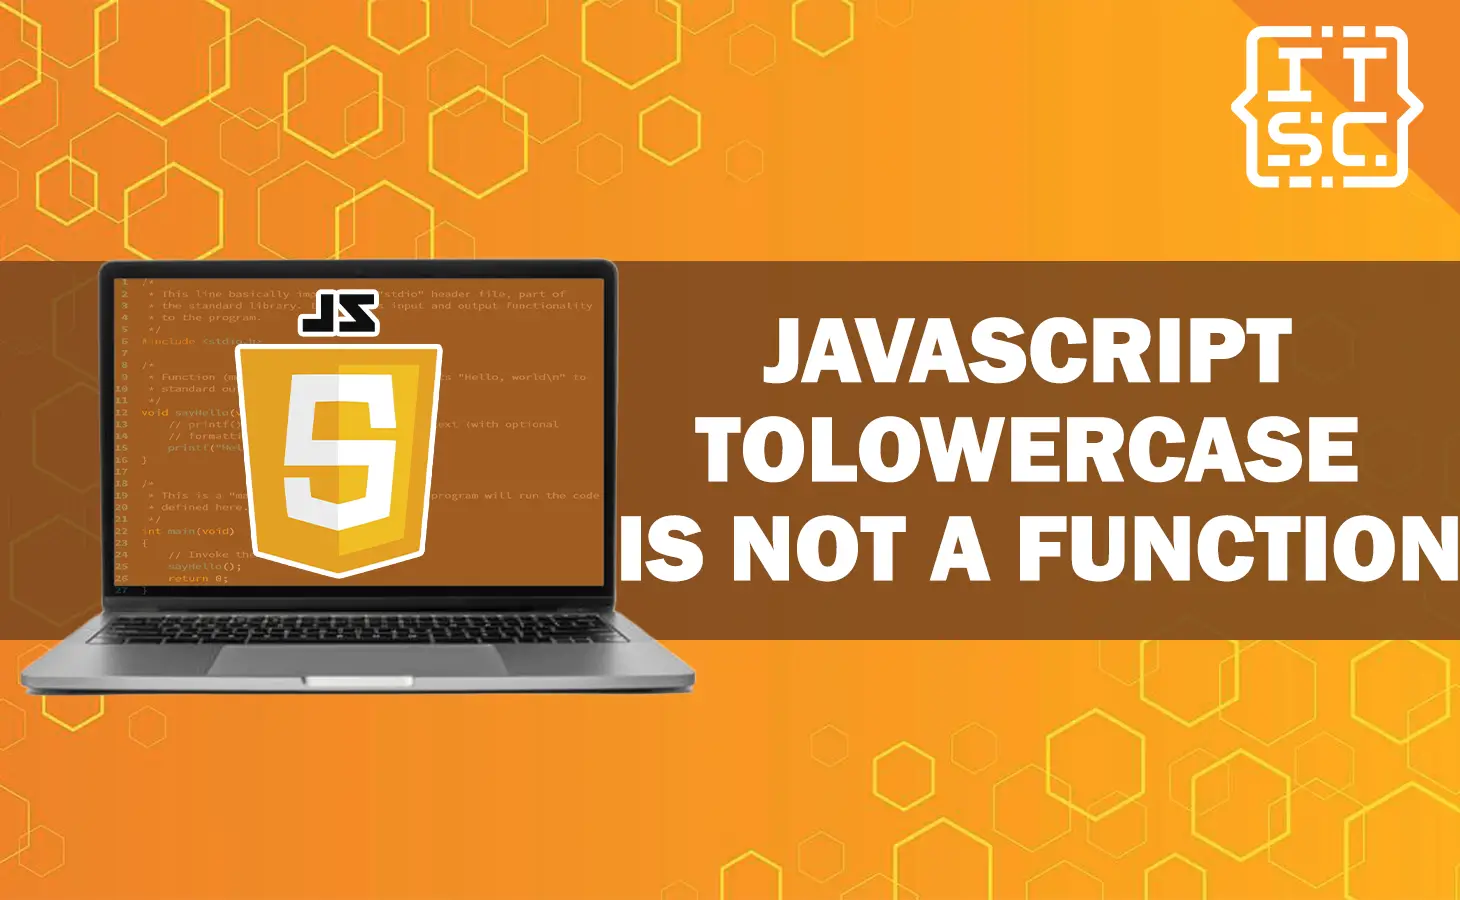 JavaScript toLowerCase is Not a Function